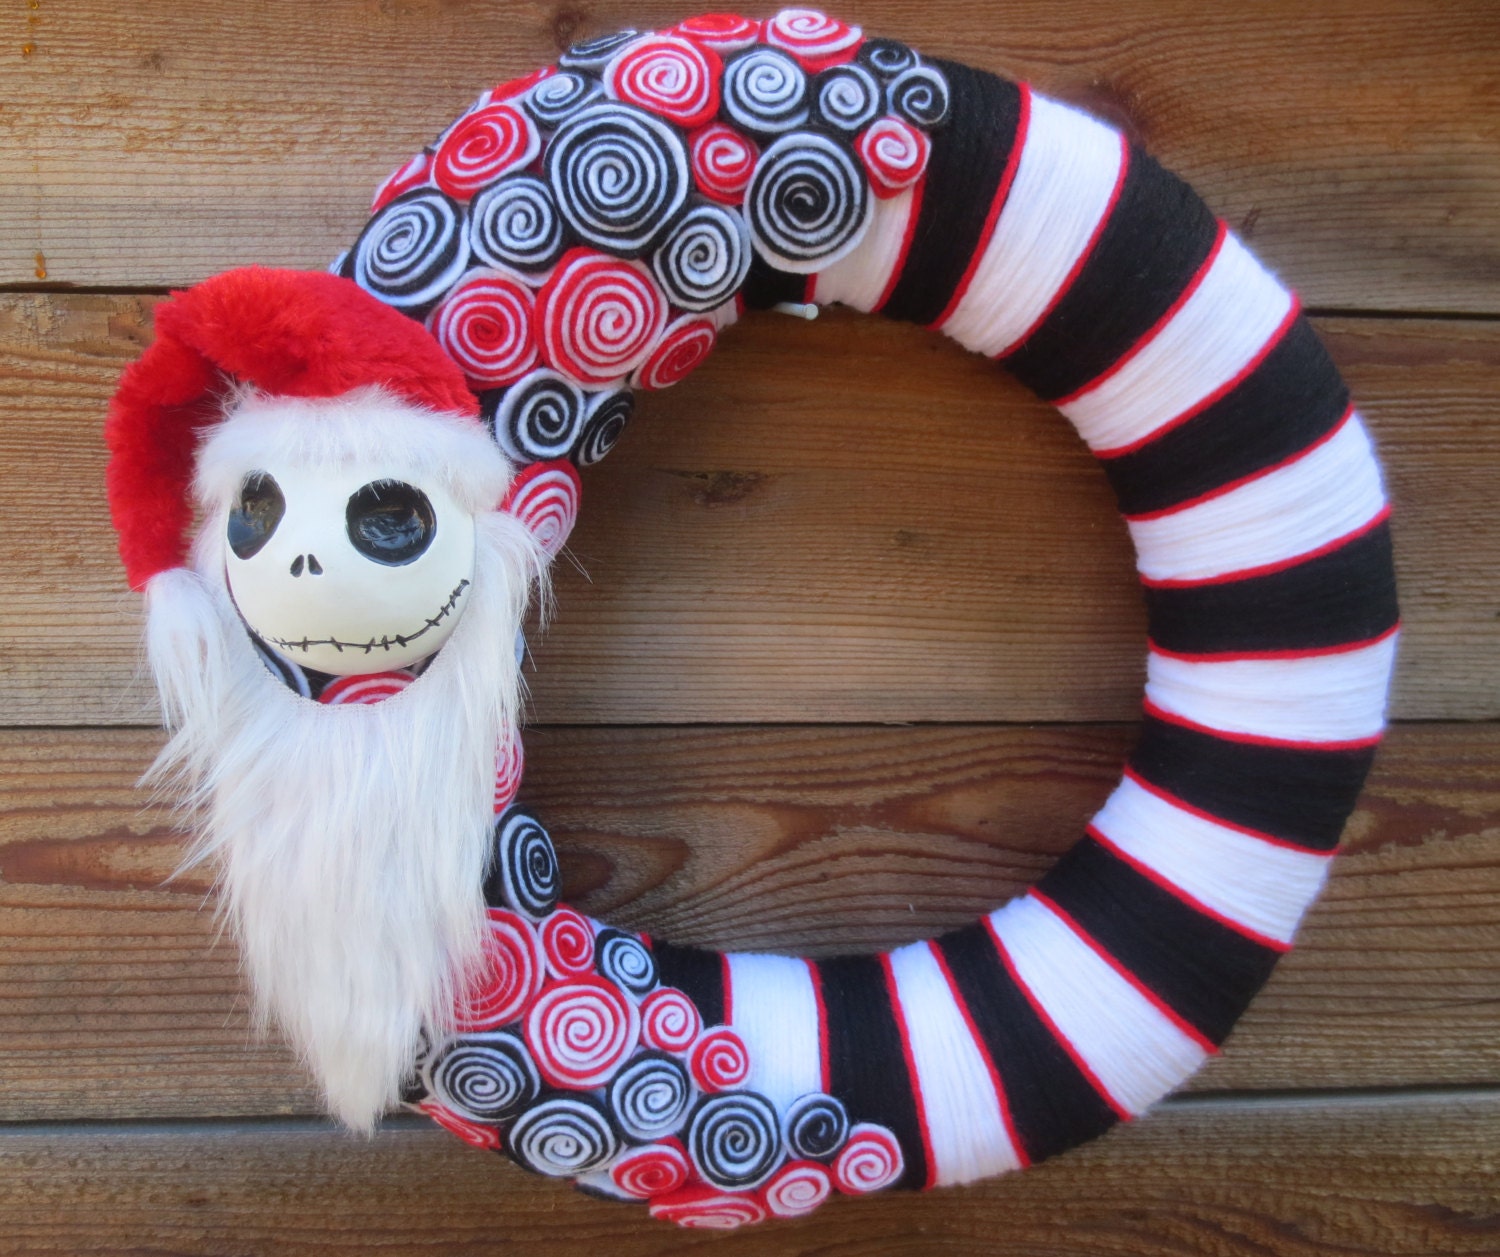 Jack Skellington as "Sandy Claws" The Nightmare Before Christmas 14", yarn wrapped, felt holiday wreath